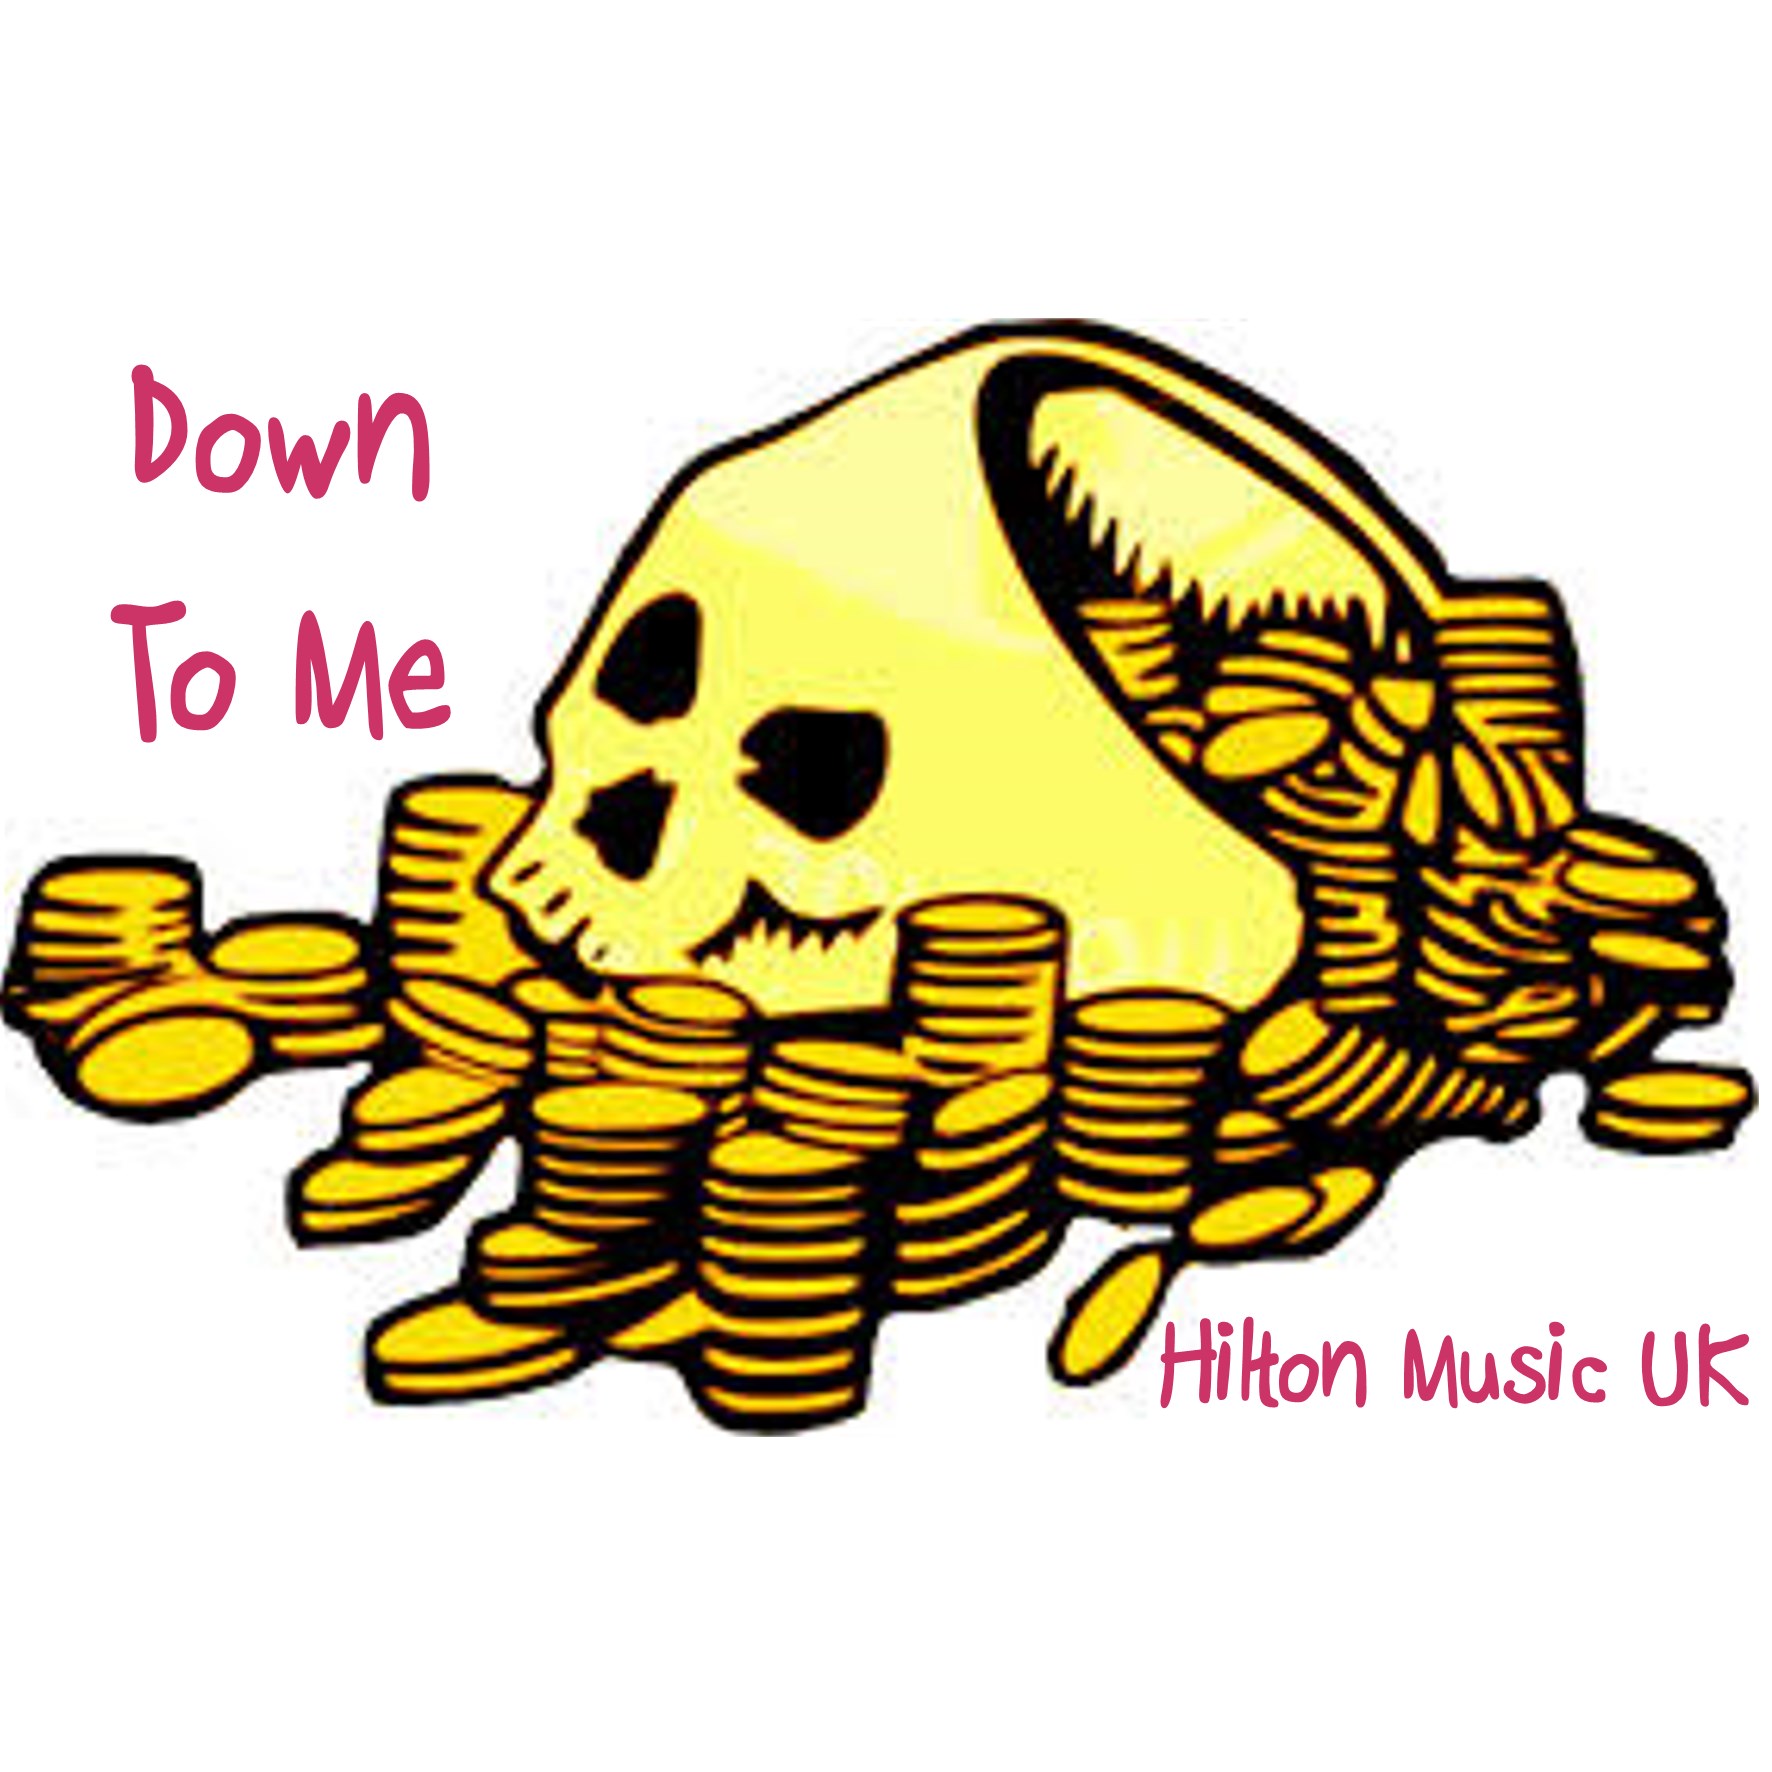 The gap between rich and poor is getting wider, but nobody wants to be the one to say "It's DOWN TO ME" -an anti-poverty song from Hilton Music UK